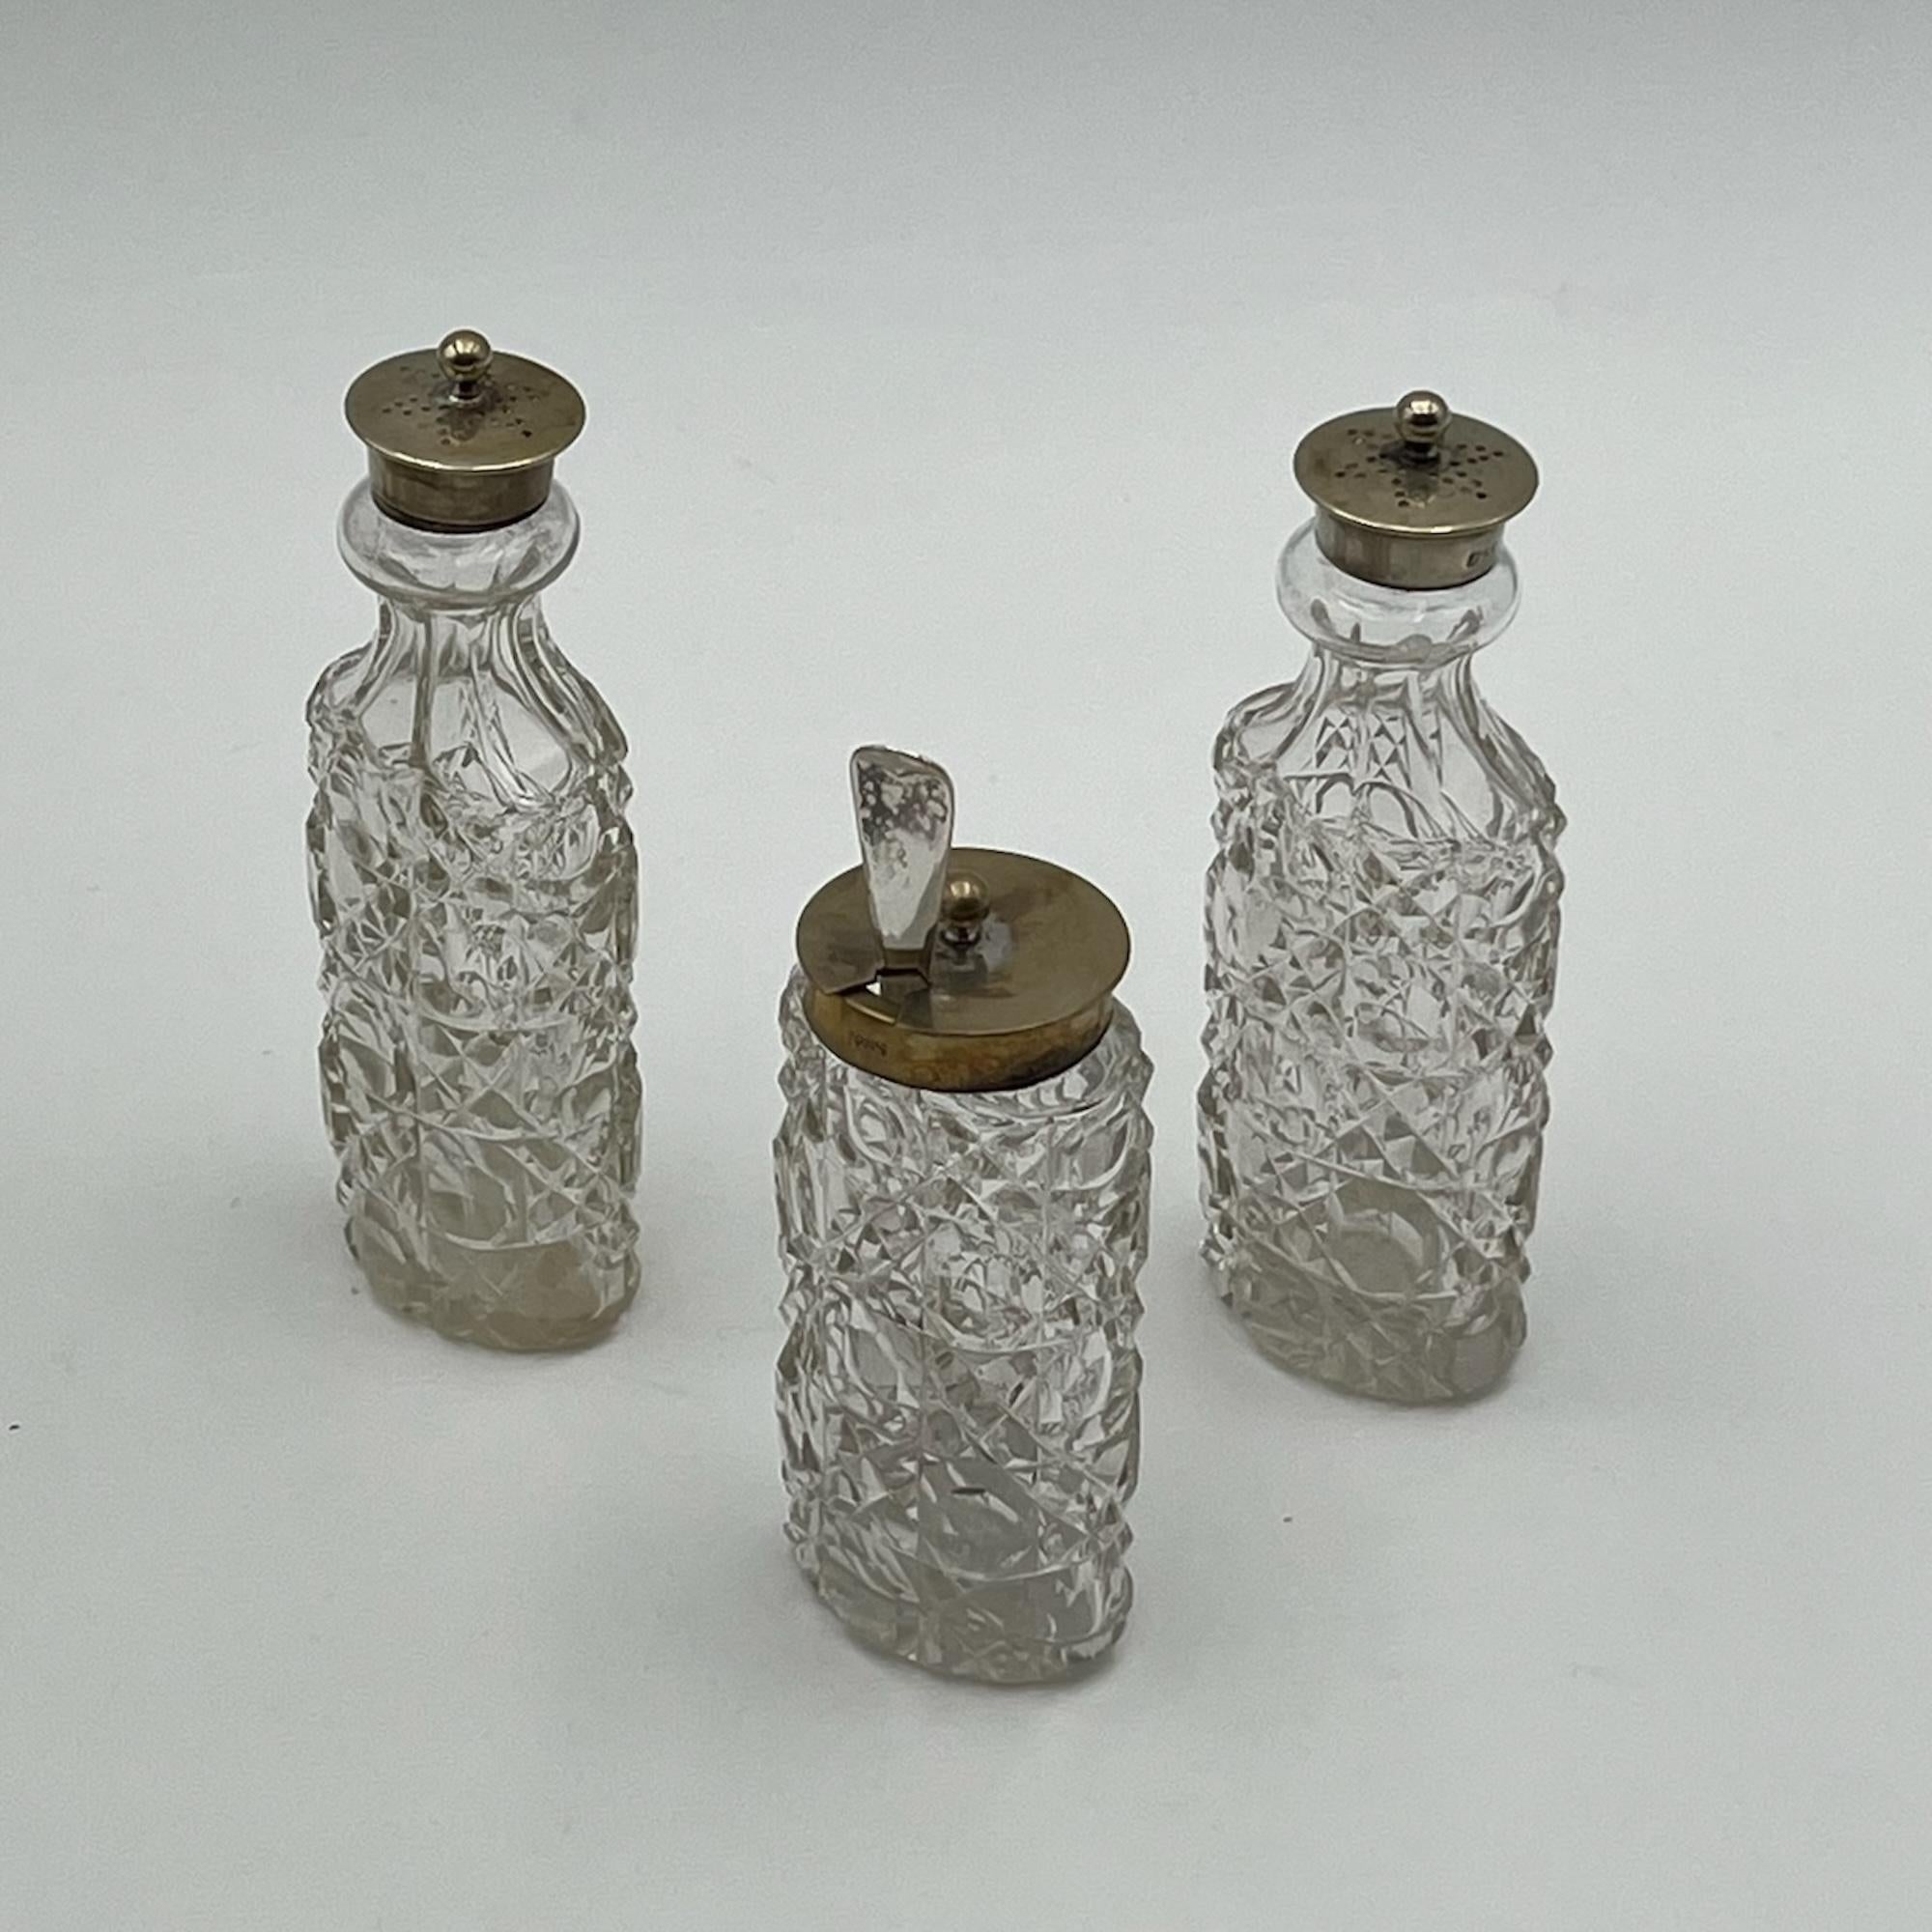 Rare 1940s Crystal Ampoule Set with Accessories - English Craftsmanship 4